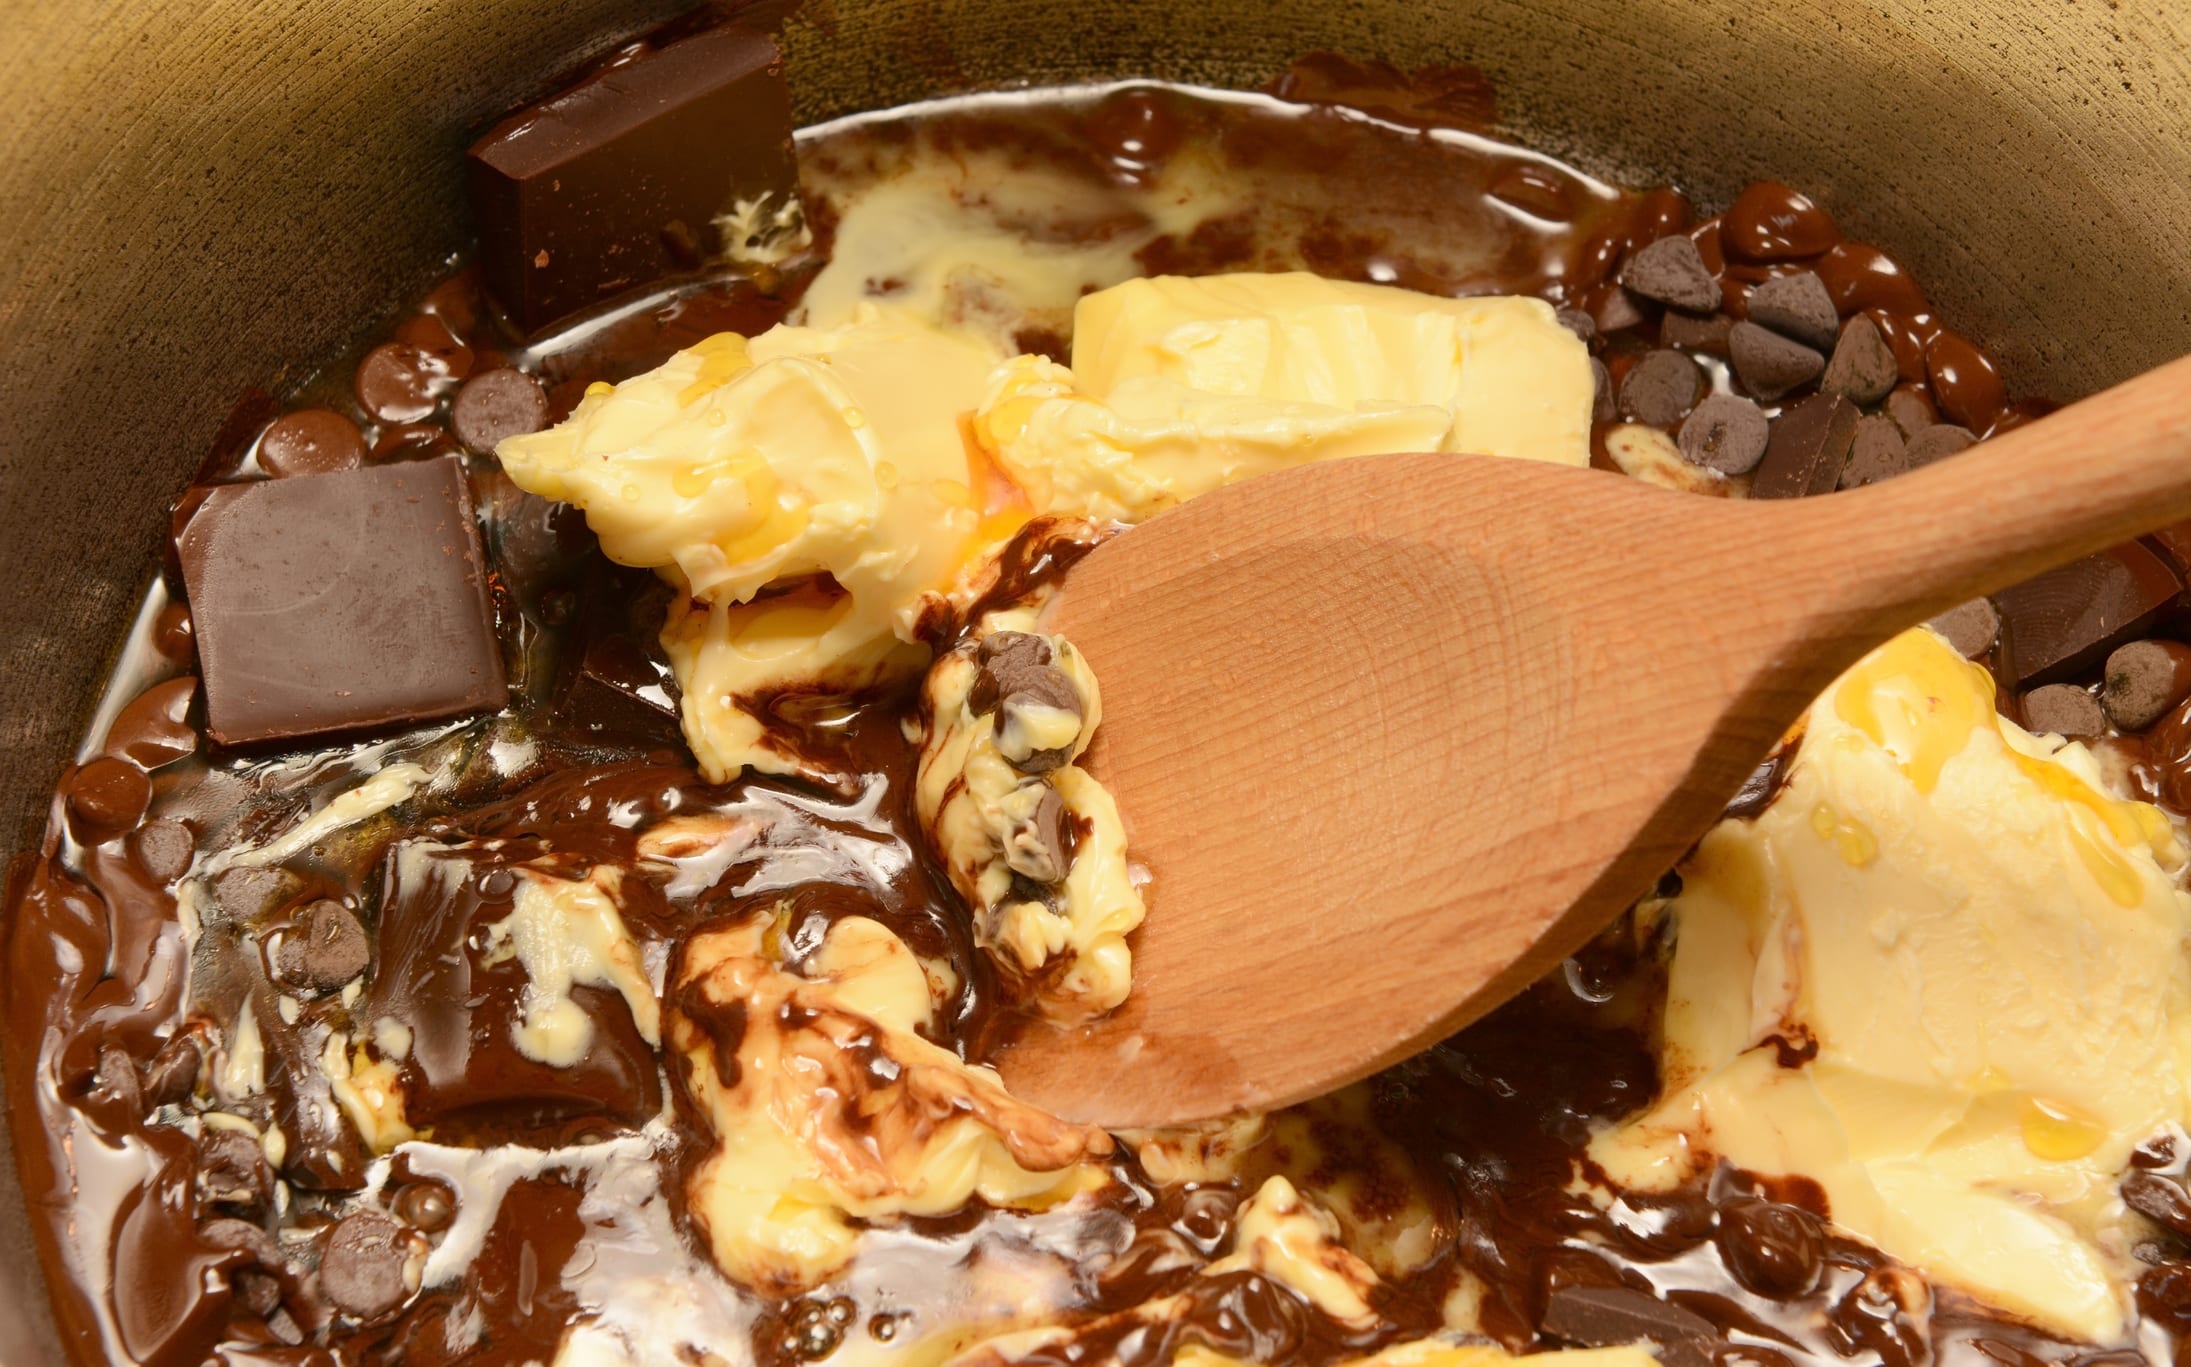 Melting Chocolate in butter